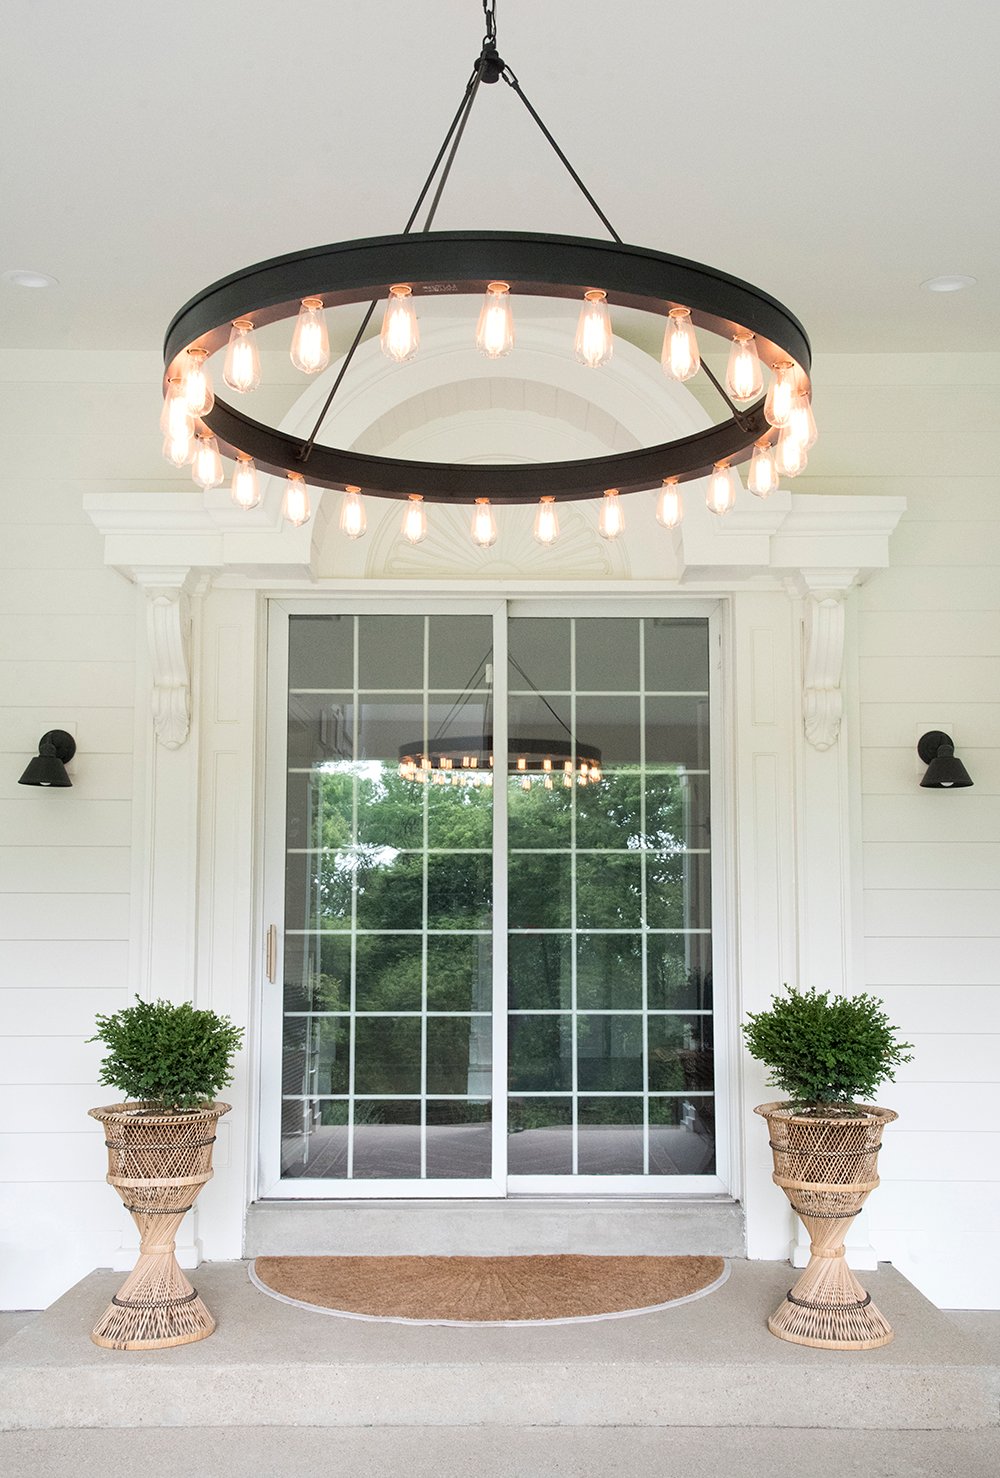 Roundup : Outdoor Sconces + Porch Lights Under $150 - roomfortuesday.com